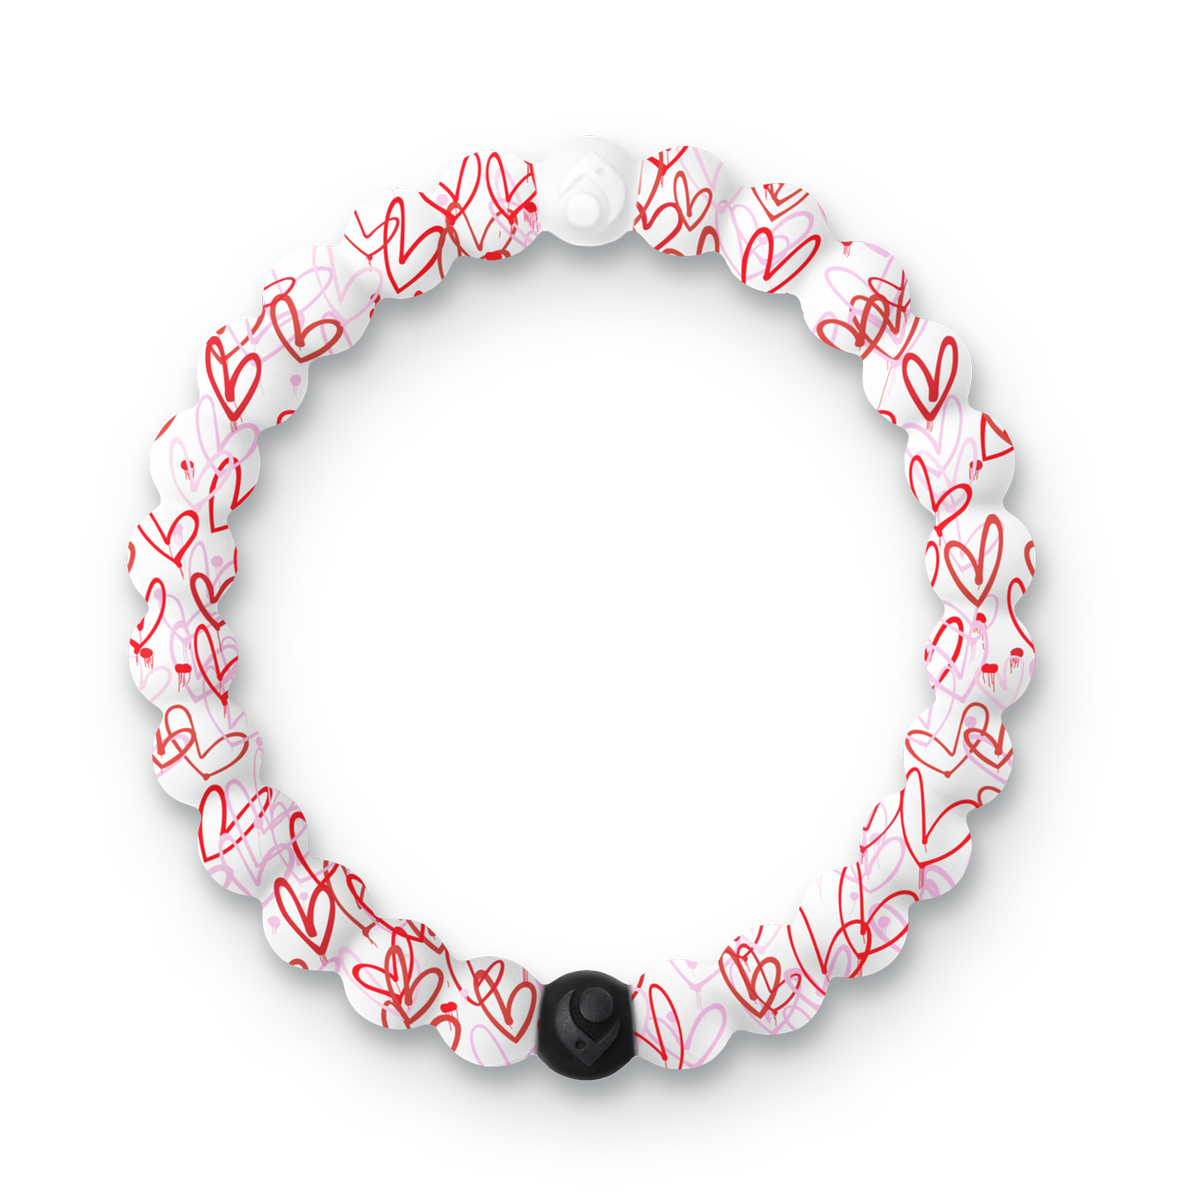 Lokai Disney Bracelets Just Dropped, and We're in Love - Perfecting the  Magic